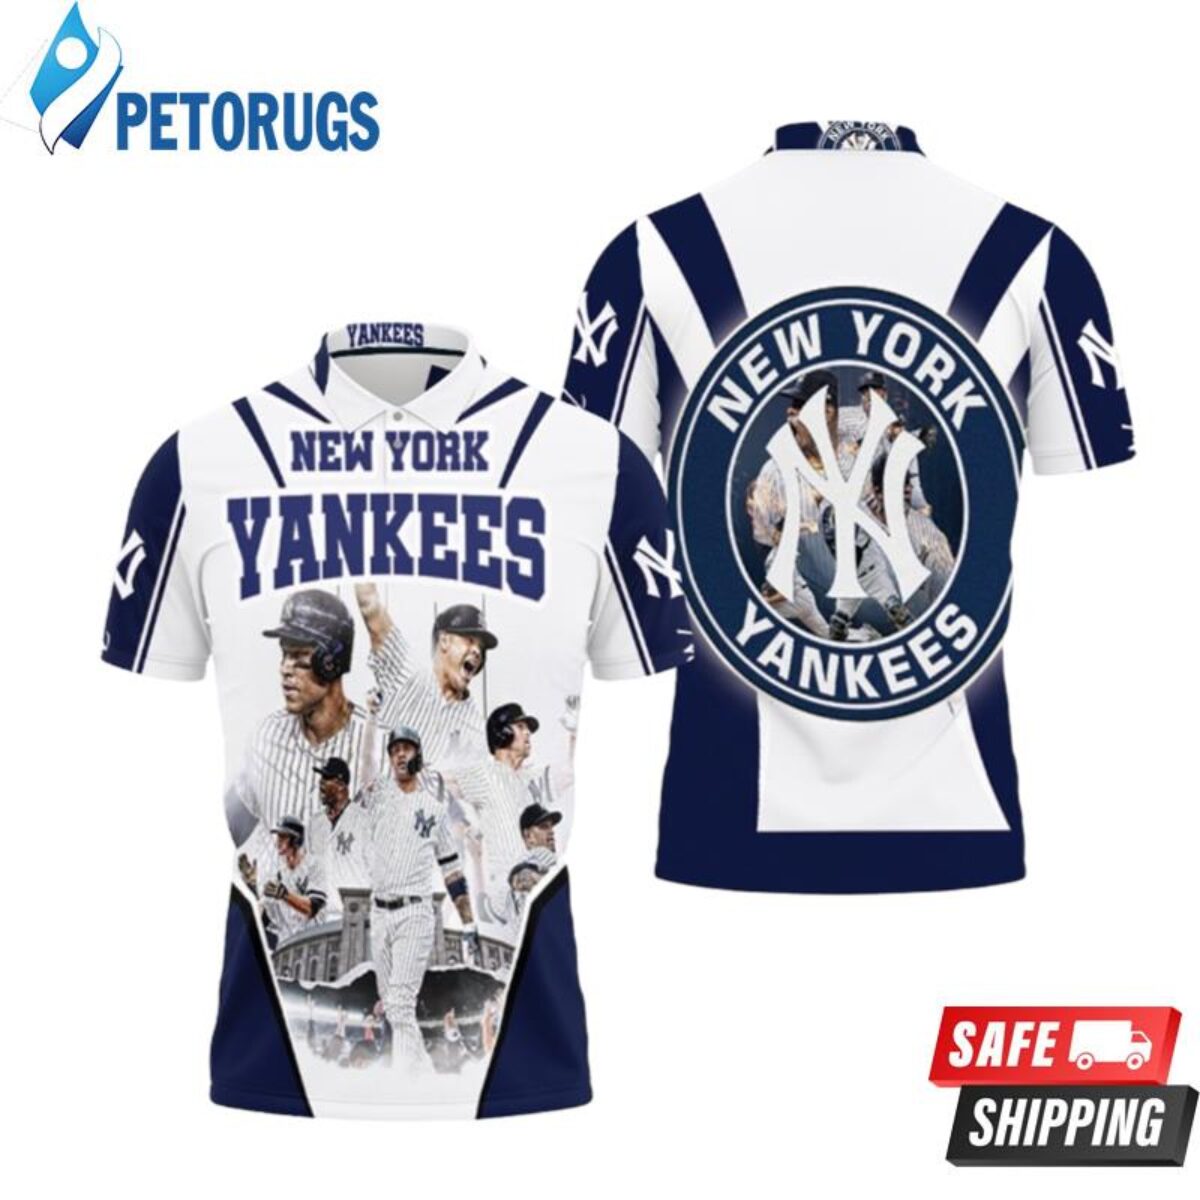 New York Yankees Al East Champions Legends For Fan Polo Shirts - Peto Rugs